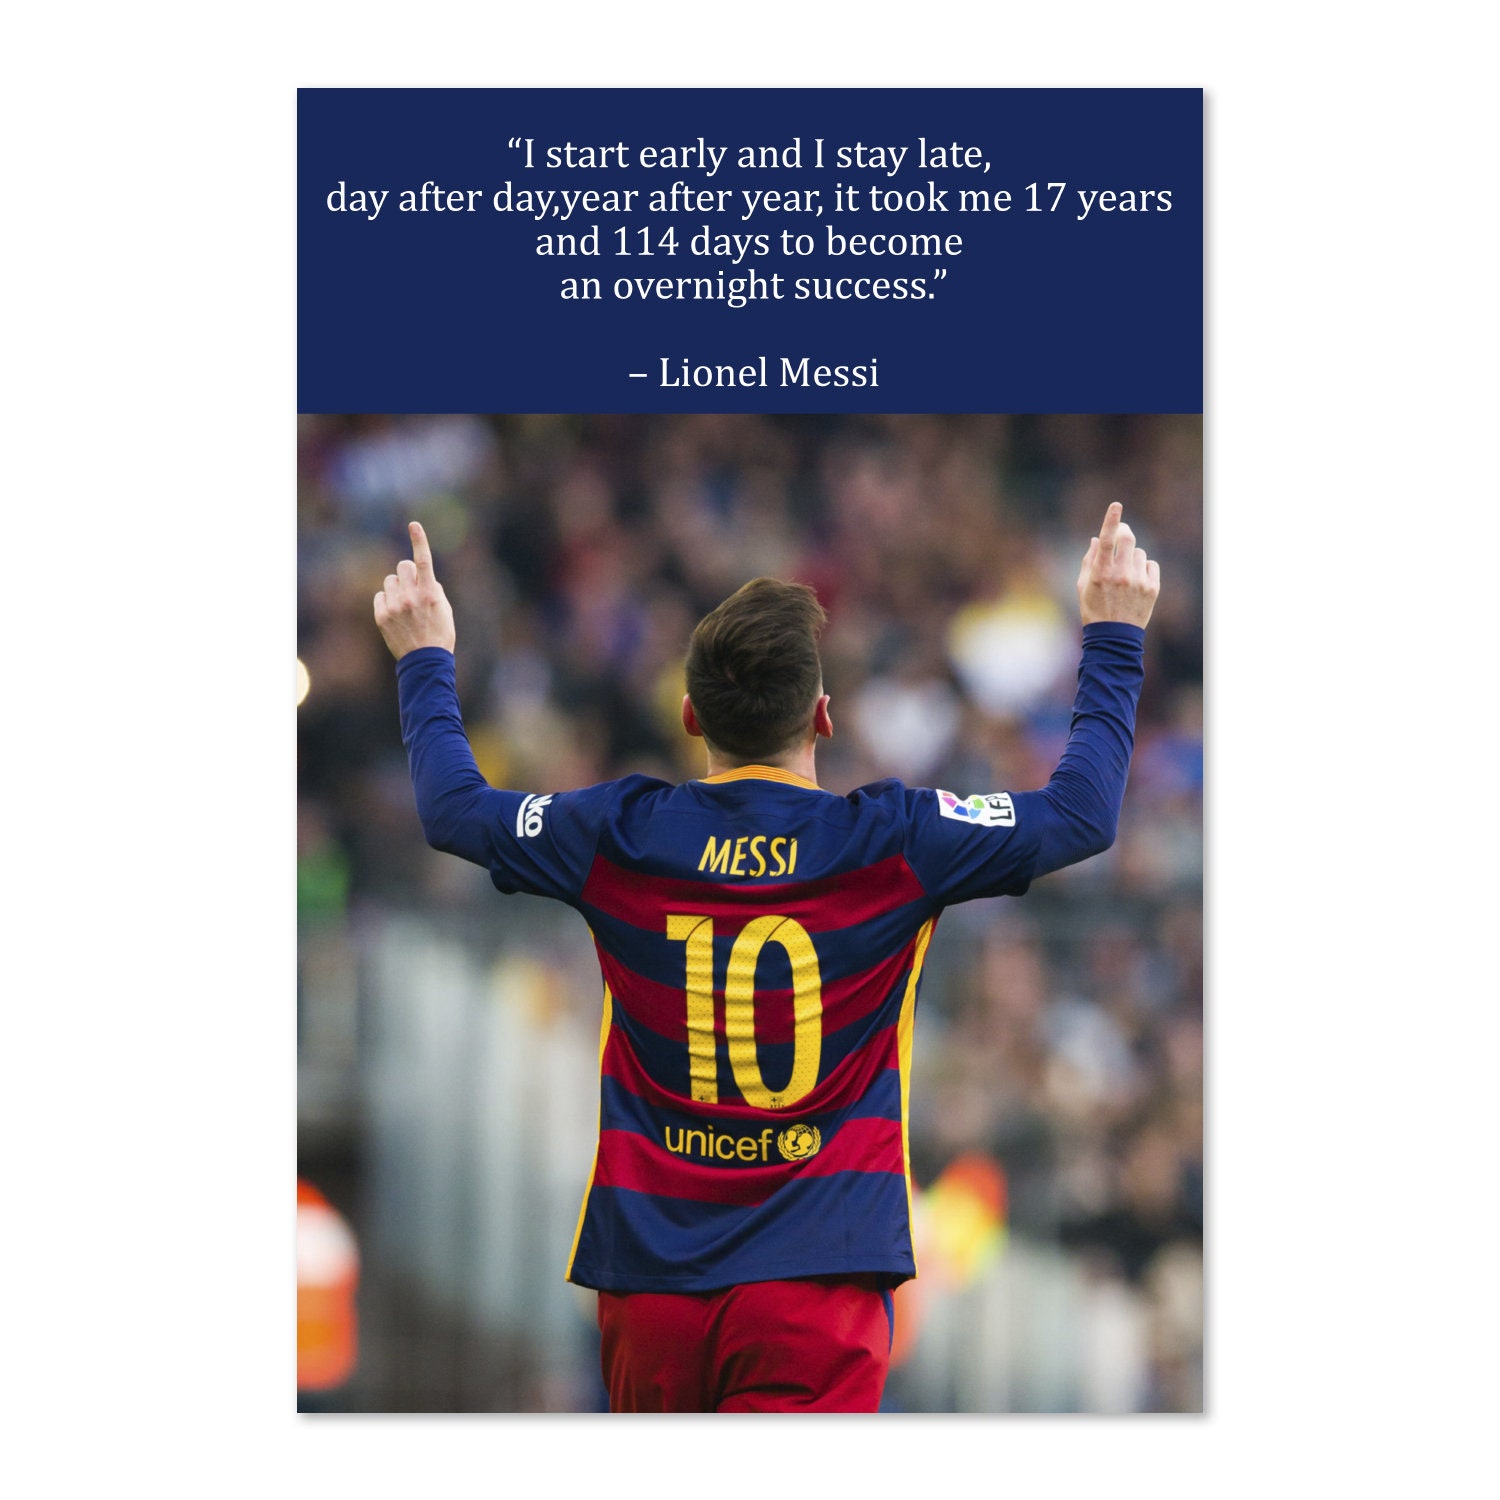 lionel messi quotes about life